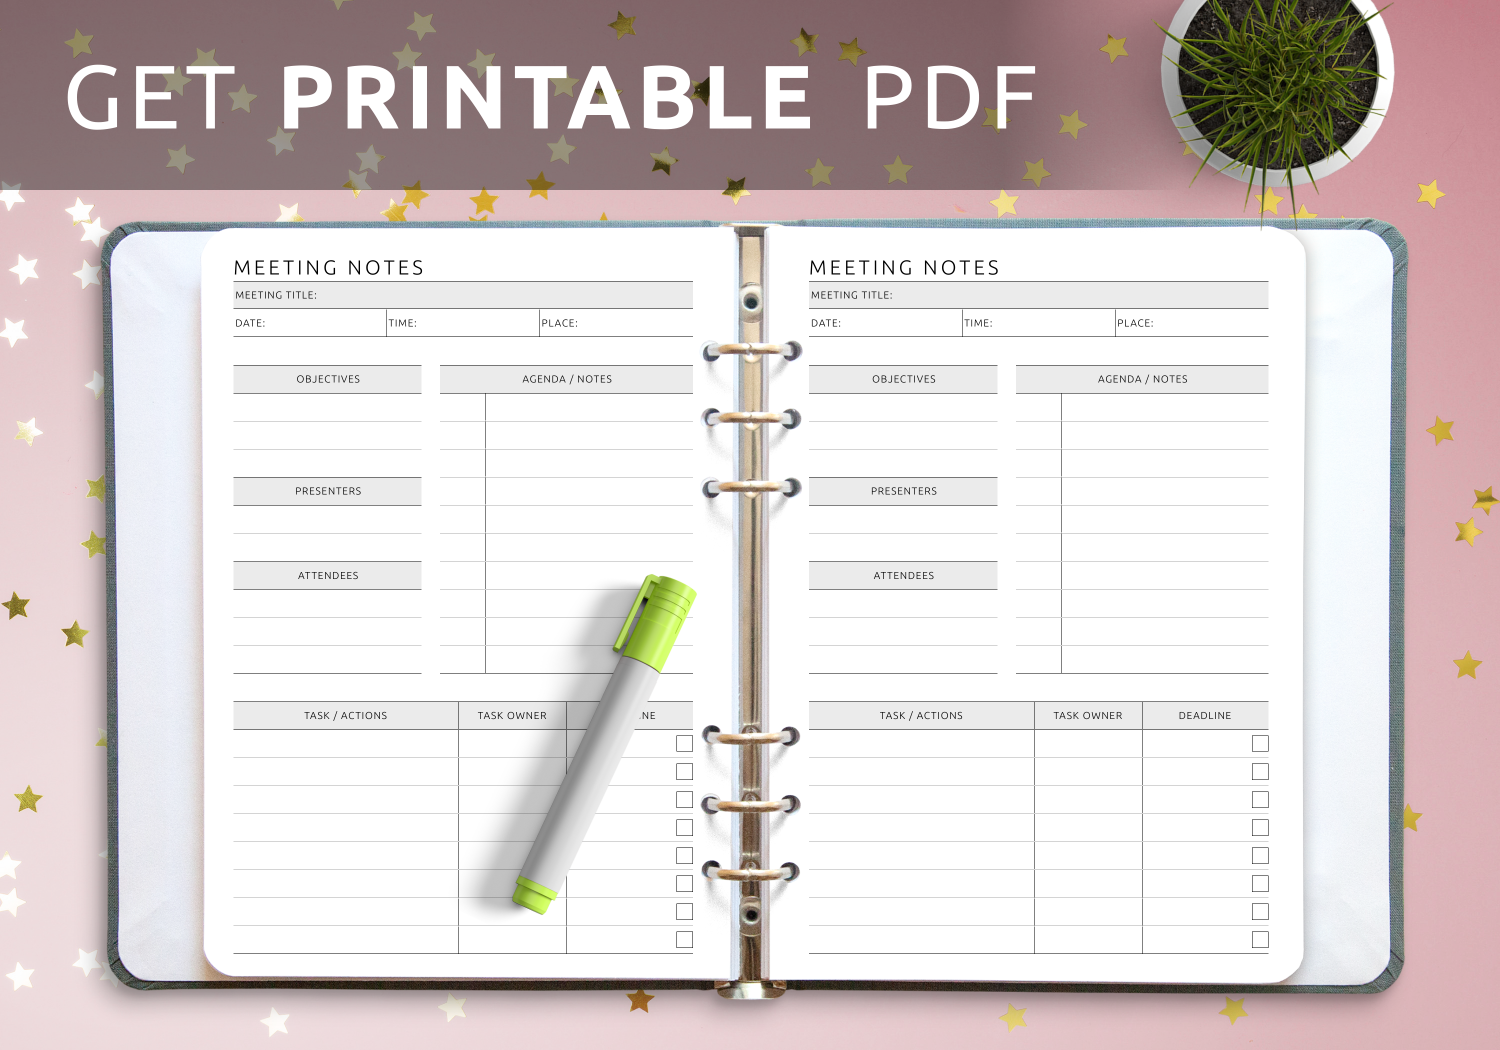 thuis Geschikt cascade Download Printable Meeting Agenda and Notes Template PDF